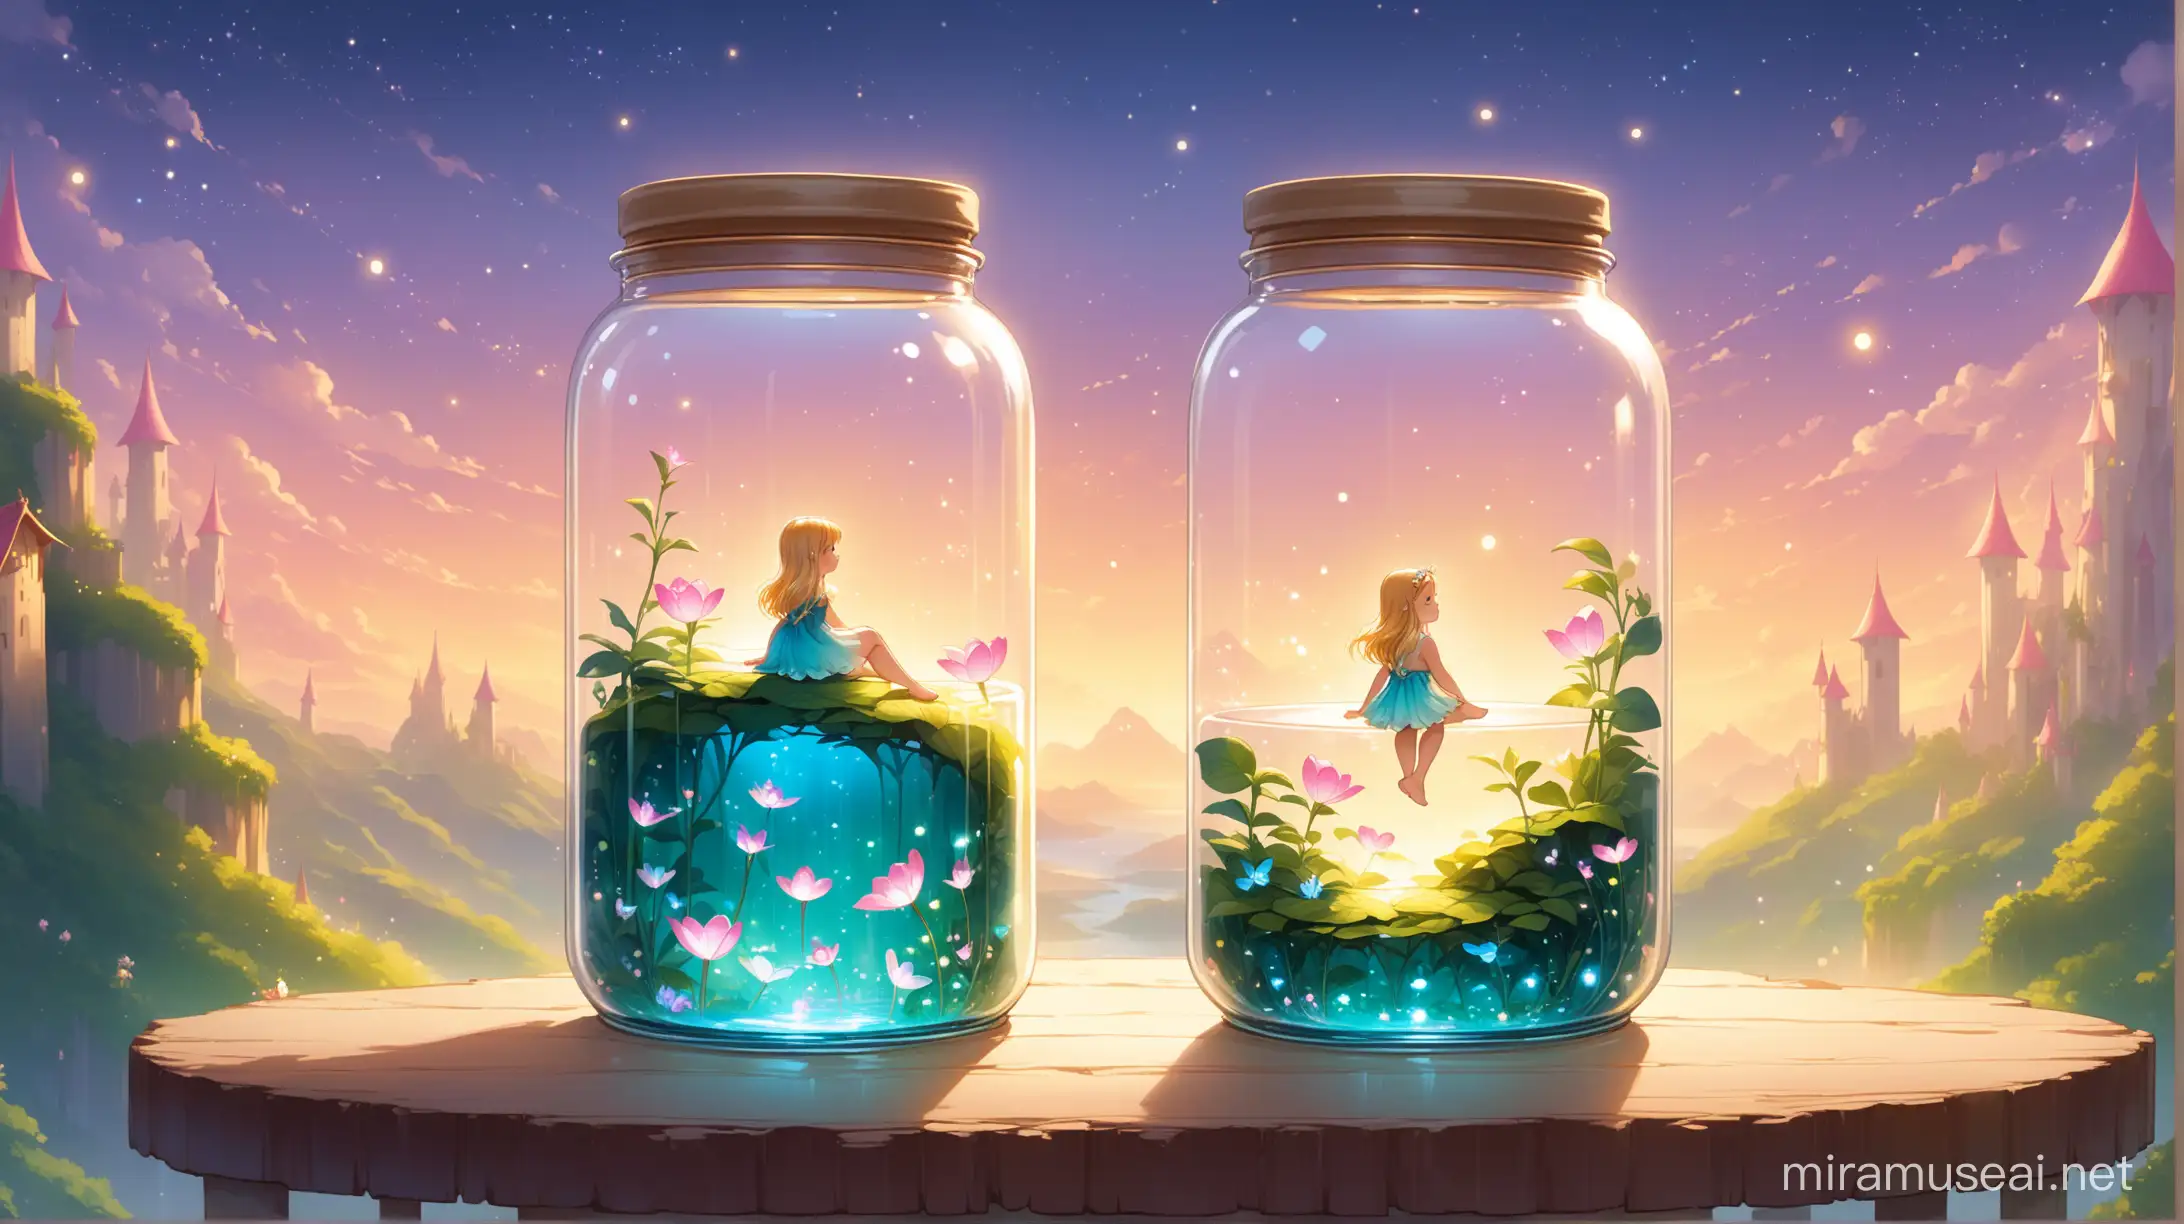 Create an enchanting scene where a Thumbelina-sized human sits gracefully on the edge of a jar, surrounded by the towering expanse of glass. Capture the whimsical perspective of this tiny individual